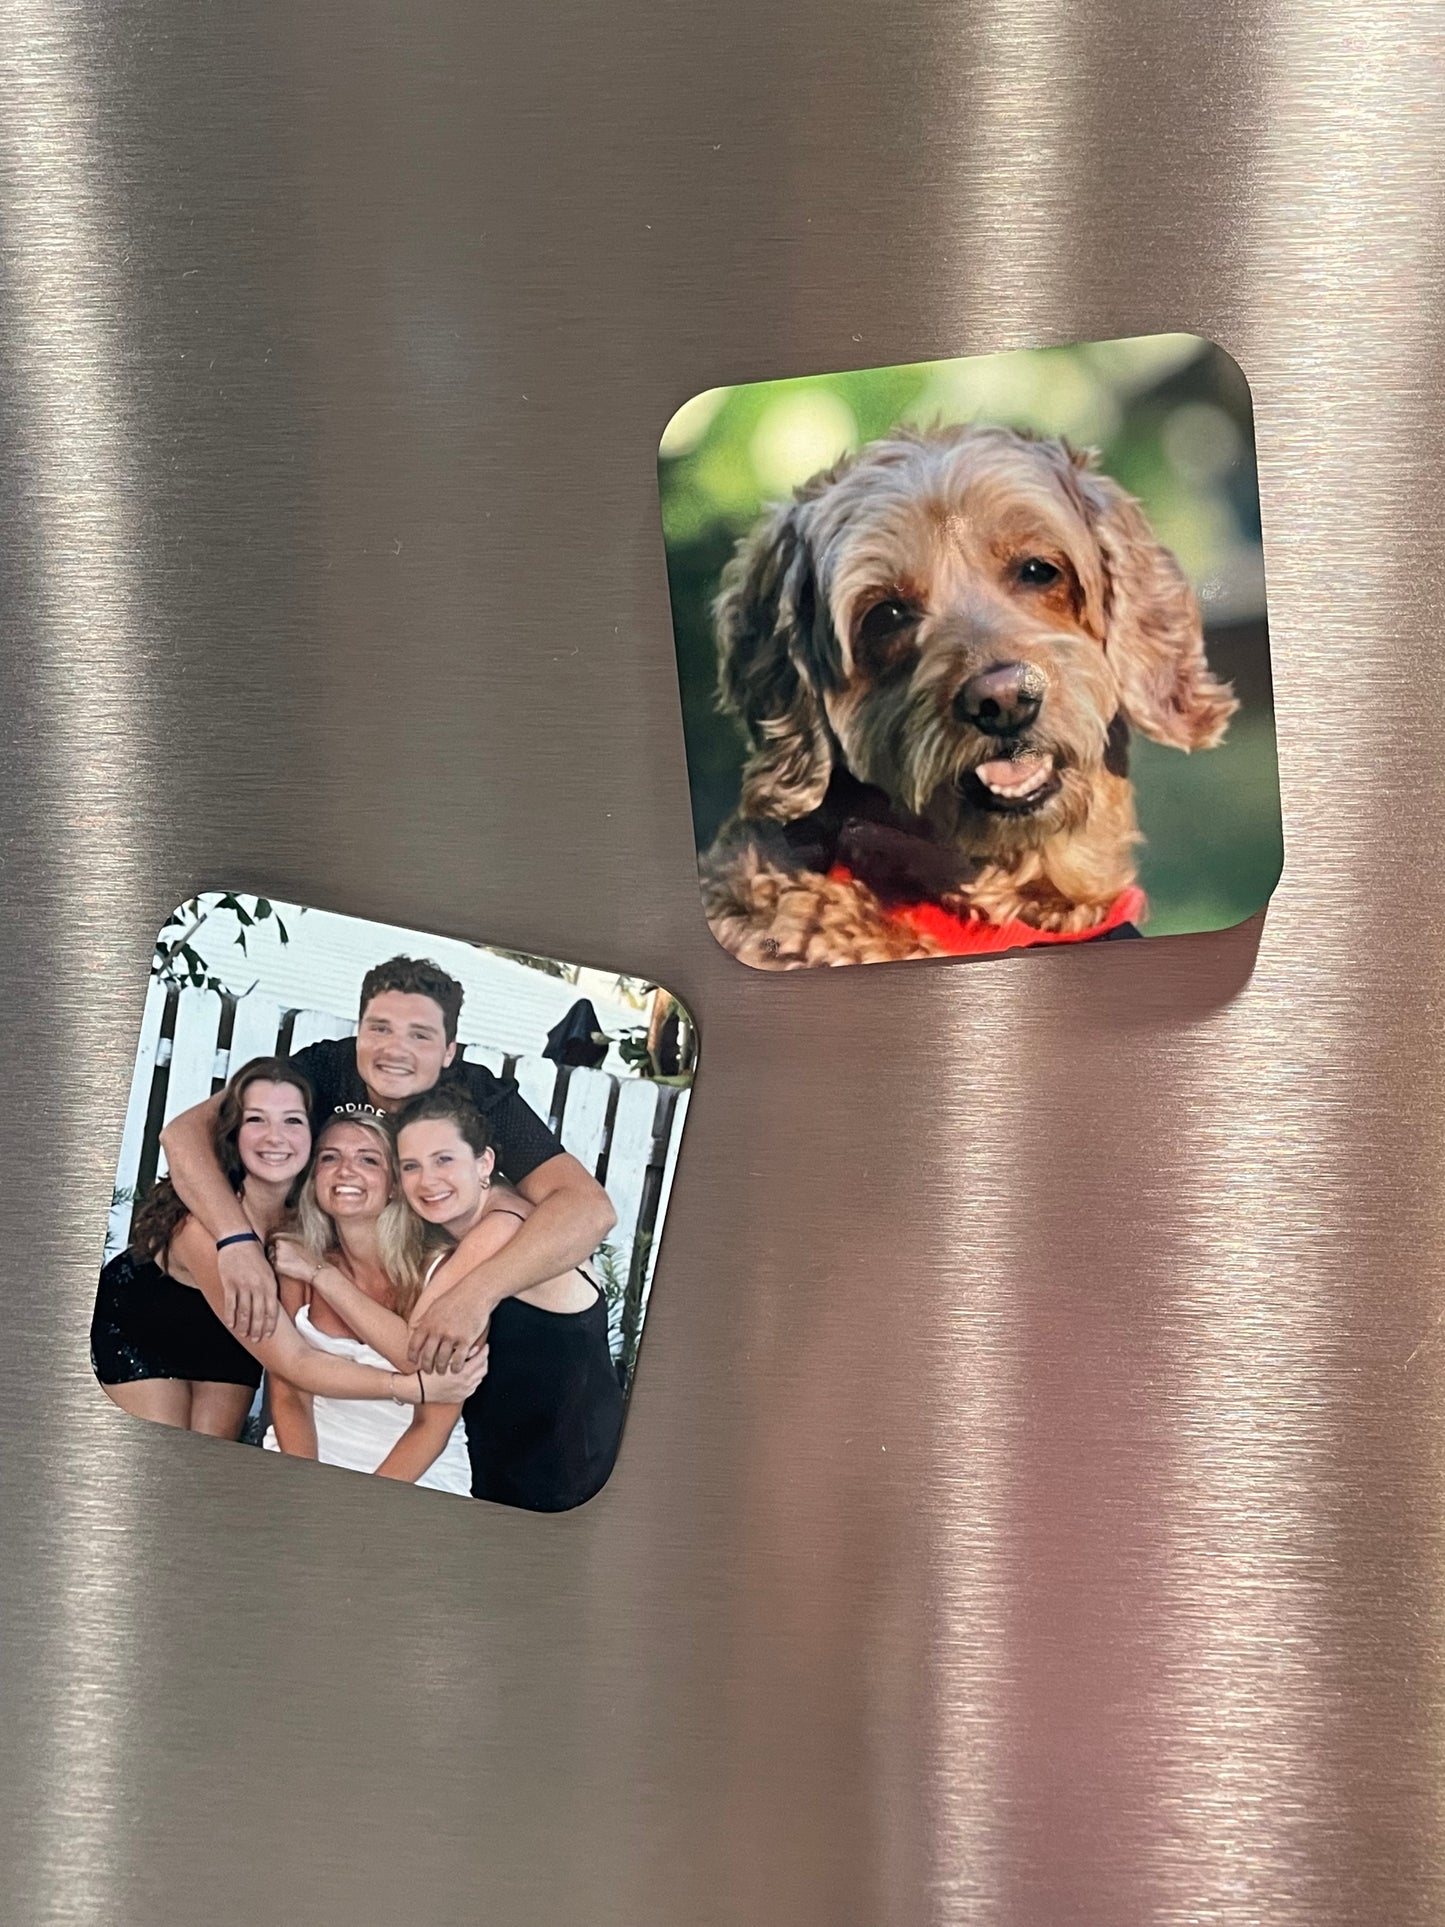 Magnet - 3"x3" - Customize with a photo of your choice